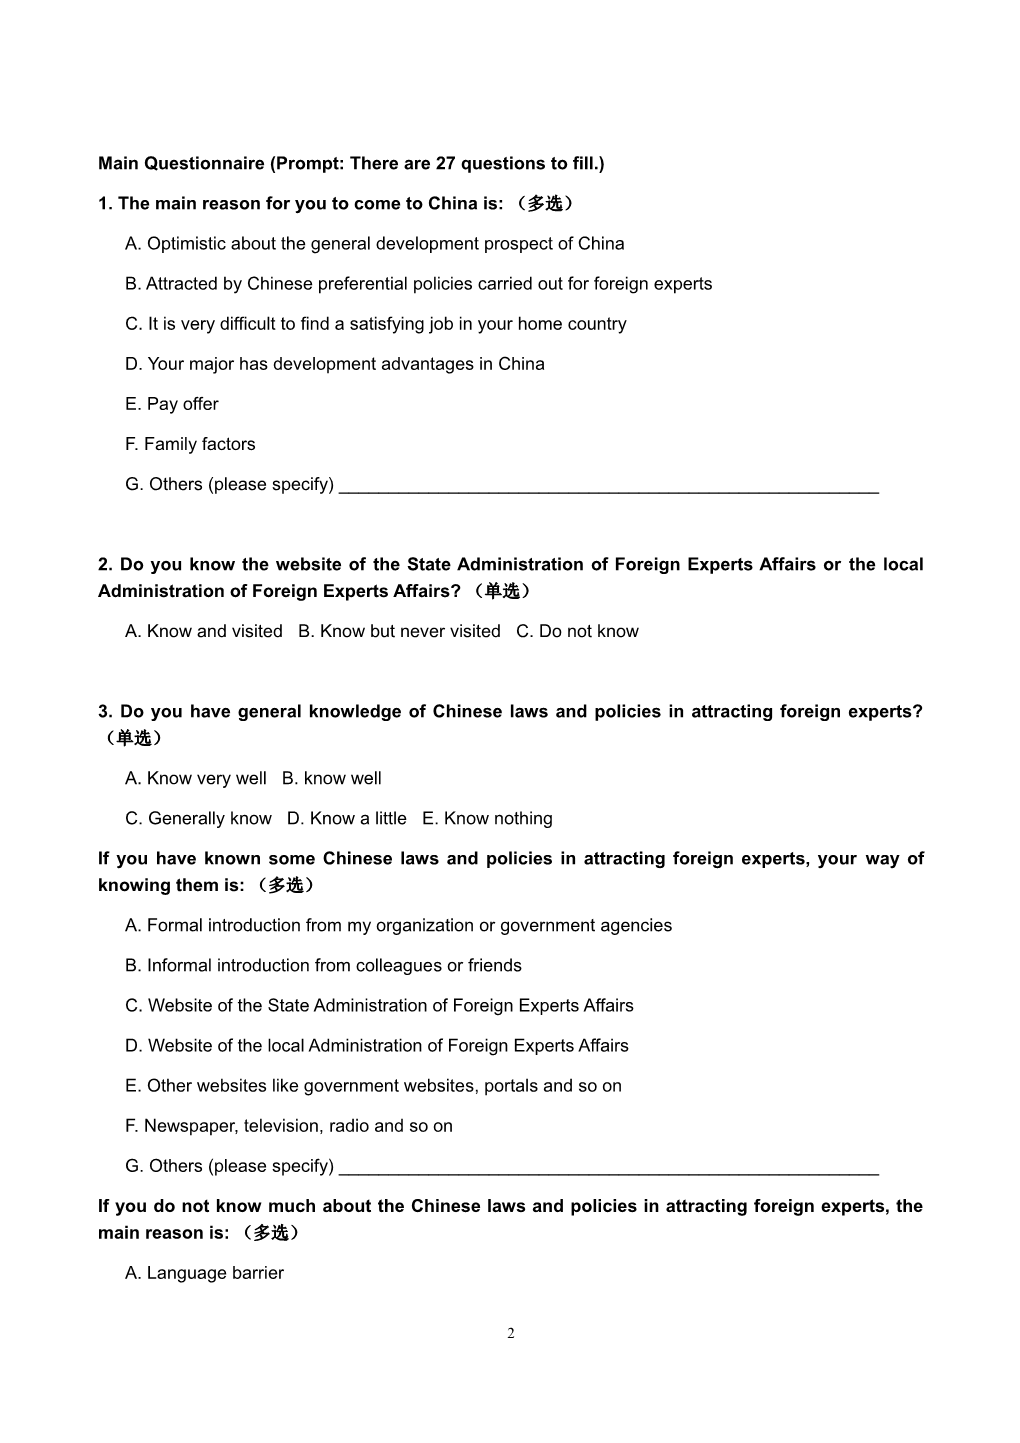 Questionnaire for Foreign Experts